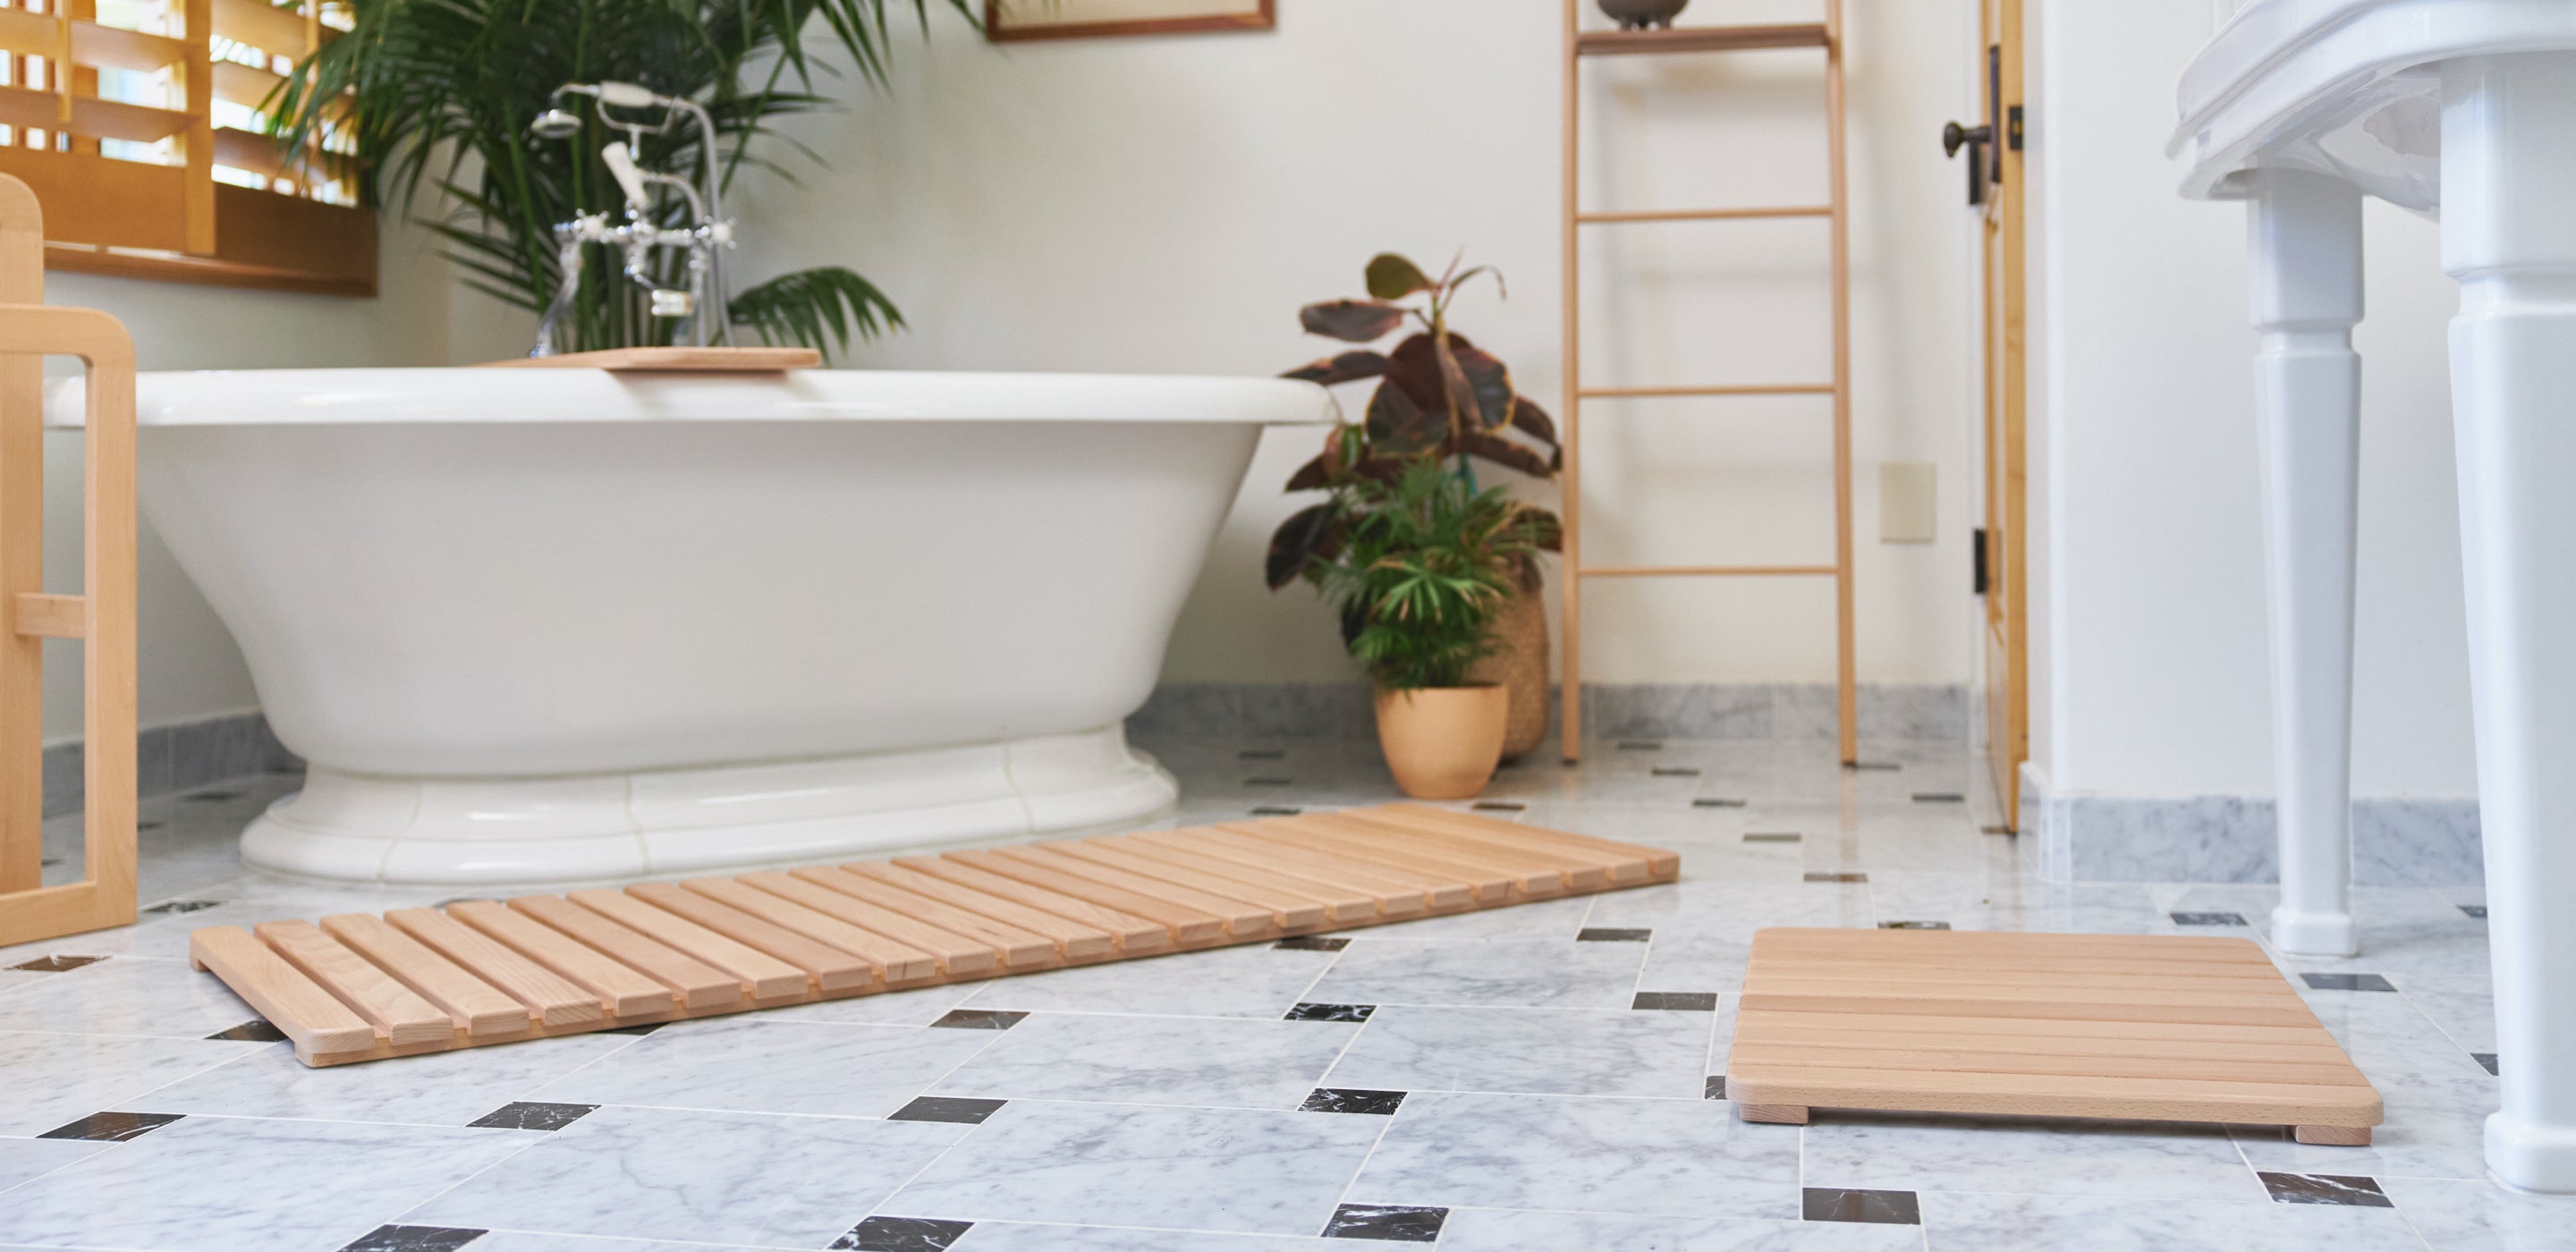 I Tried Avocado's Wooden Bath Mat and I Won't Be Going Back